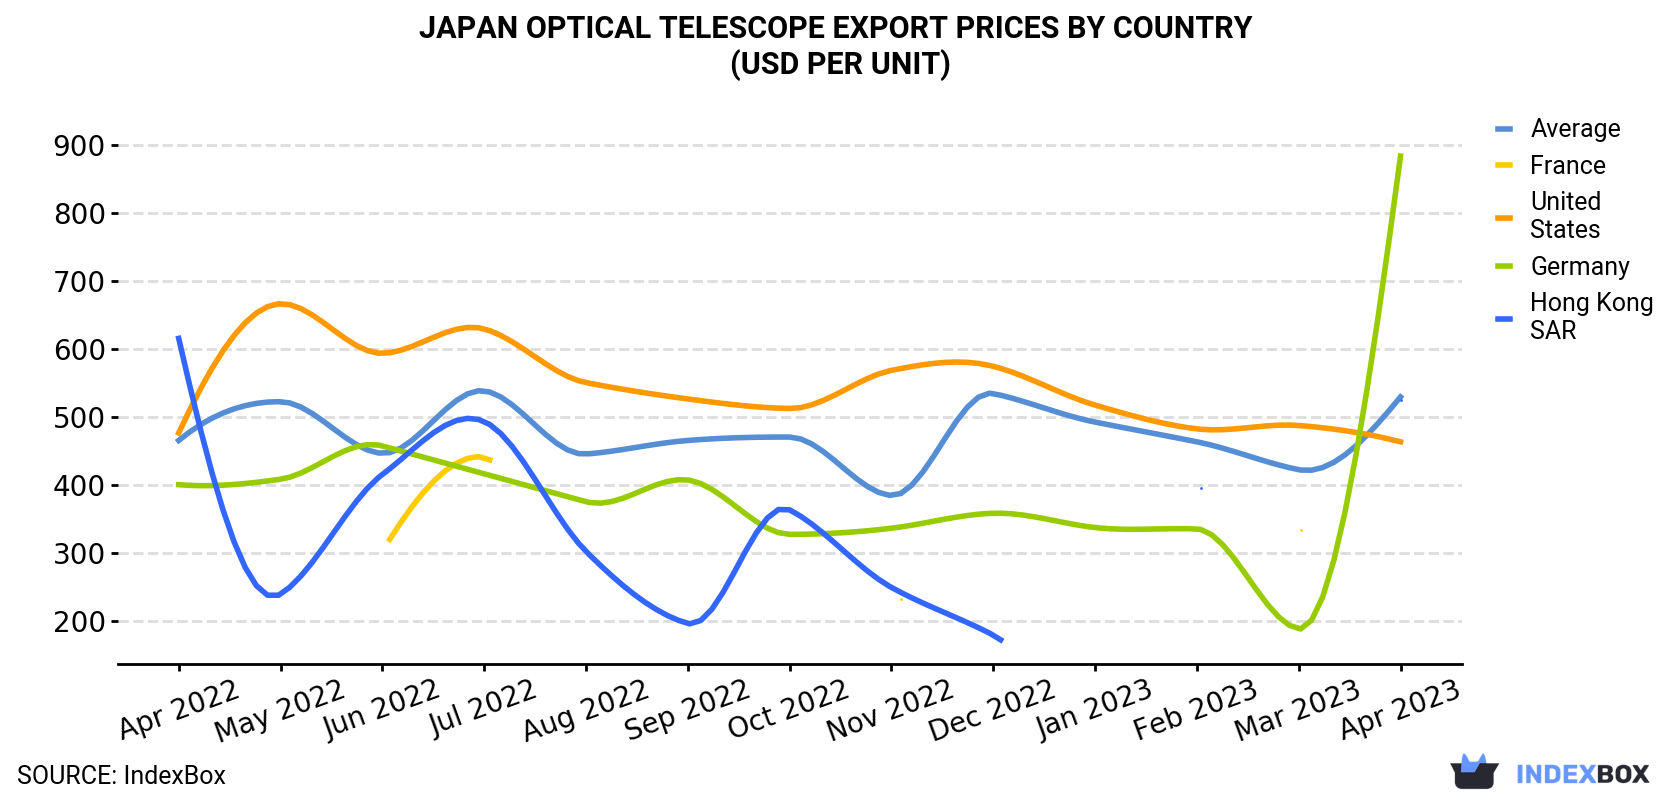 Japan Optical Telescope Export Prices By Country (USD Per Unit)